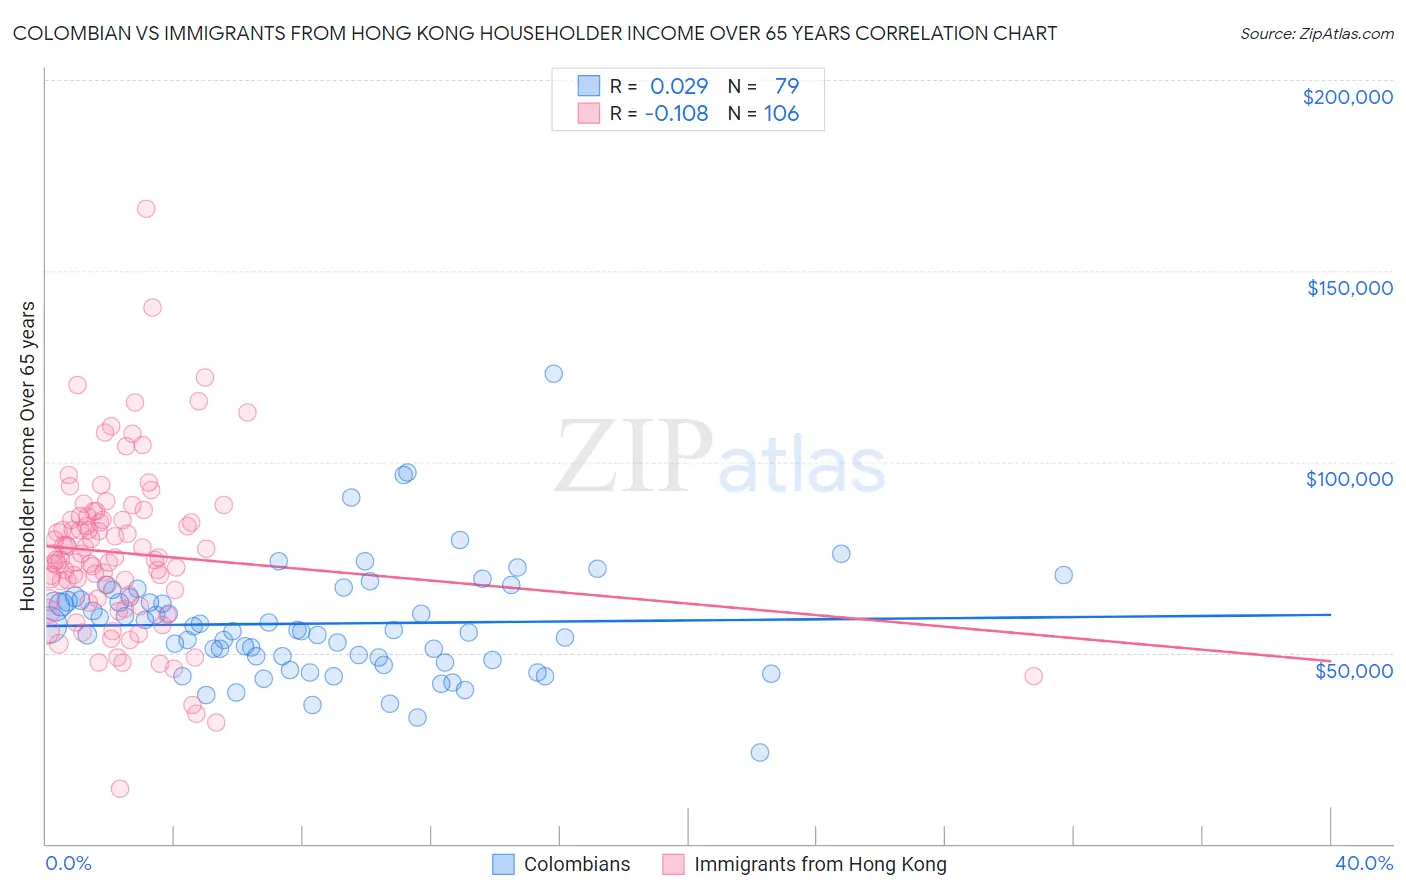 Colombian vs Immigrants from Hong Kong Householder Income Over 65 years